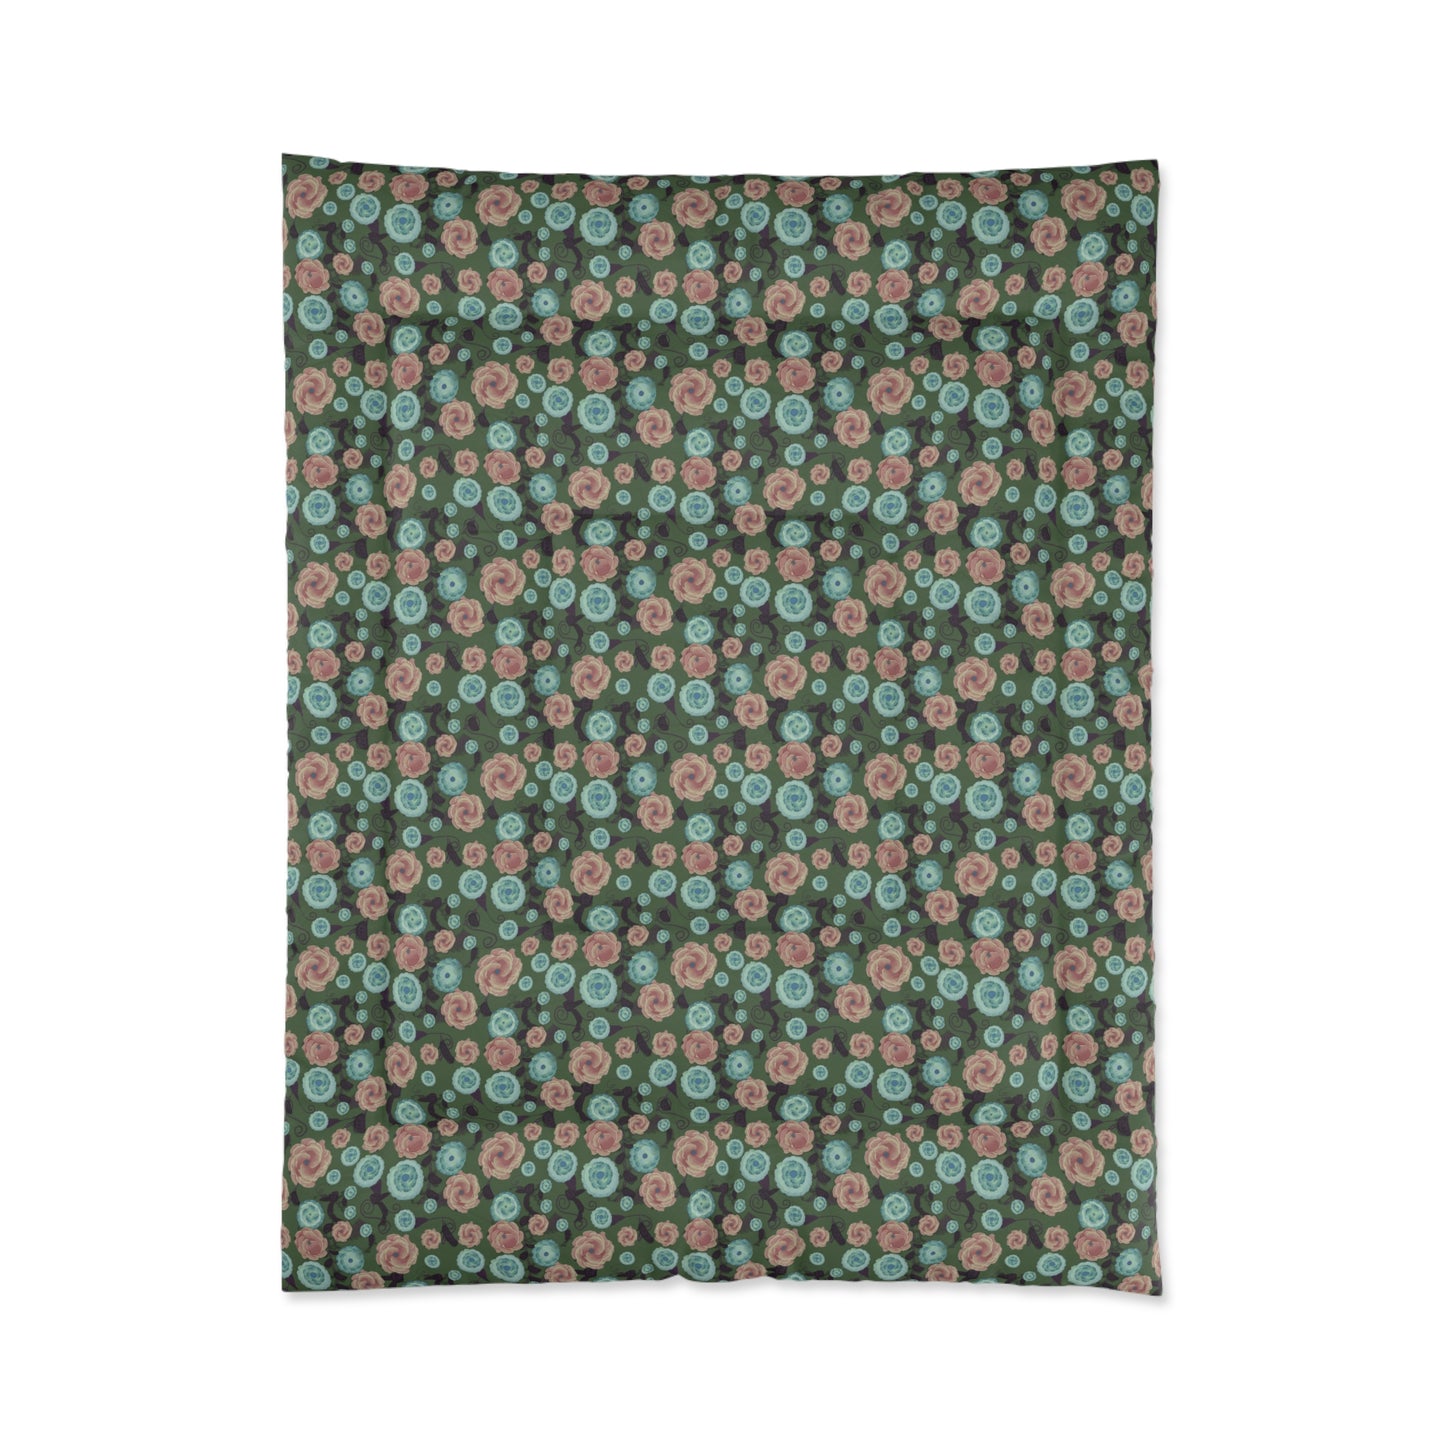 Earthy Peach and Turquoise Flower Pattern Comforter